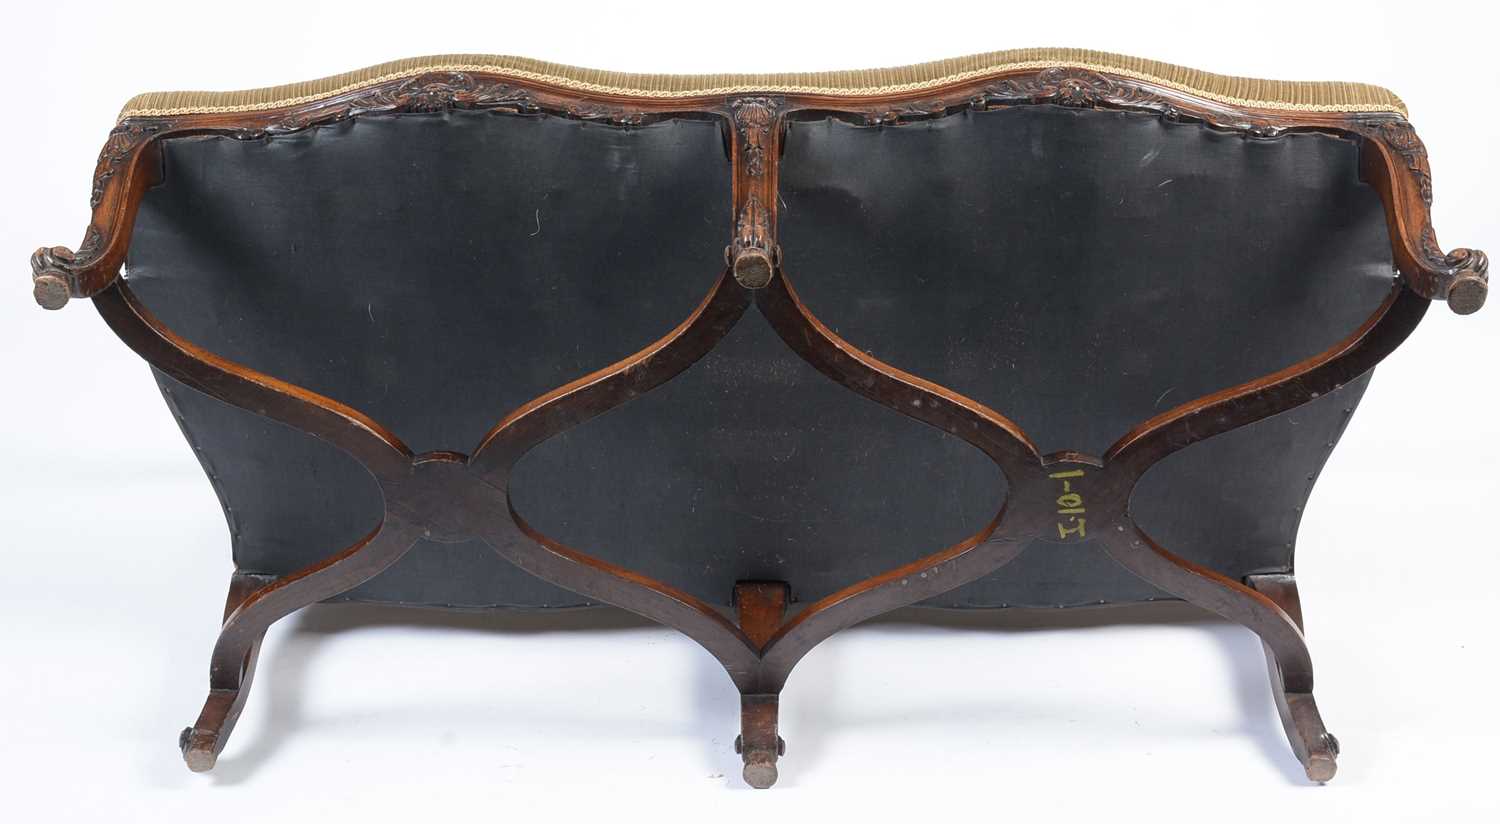 An attractive 18th Century style carved walnut high back settee, late 19th/early 20th Century - Image 12 of 15